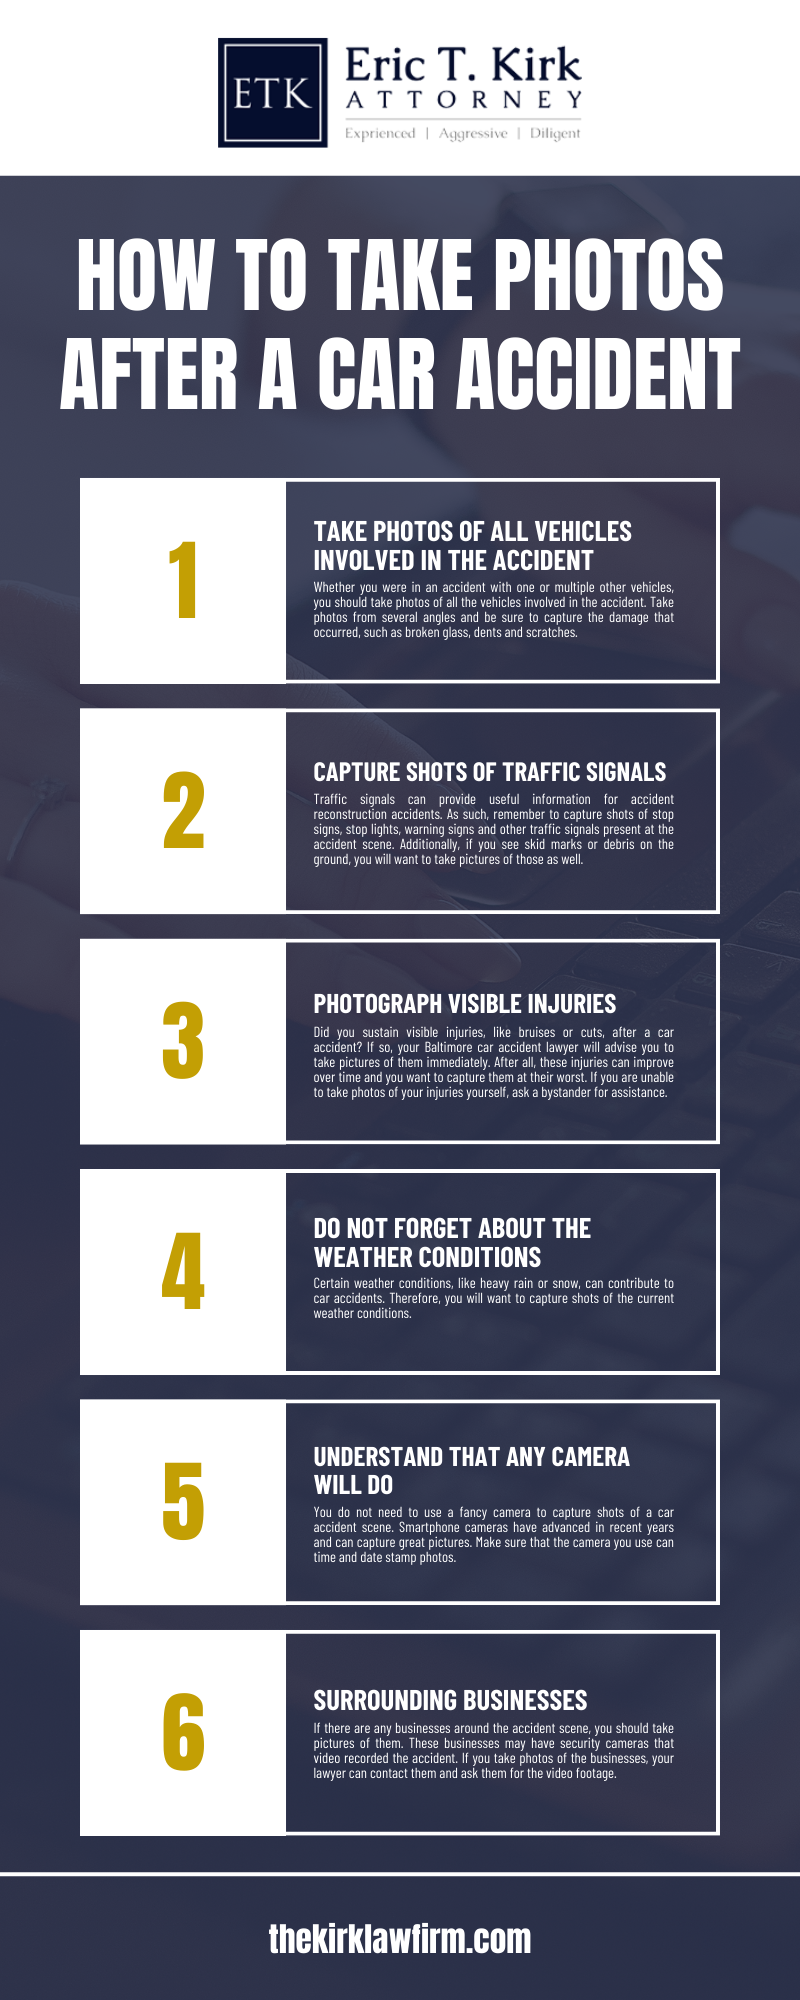 HOW TO TAKE PHOTOS AFTER A CAR ACCIDENT INFOGRAPHIC